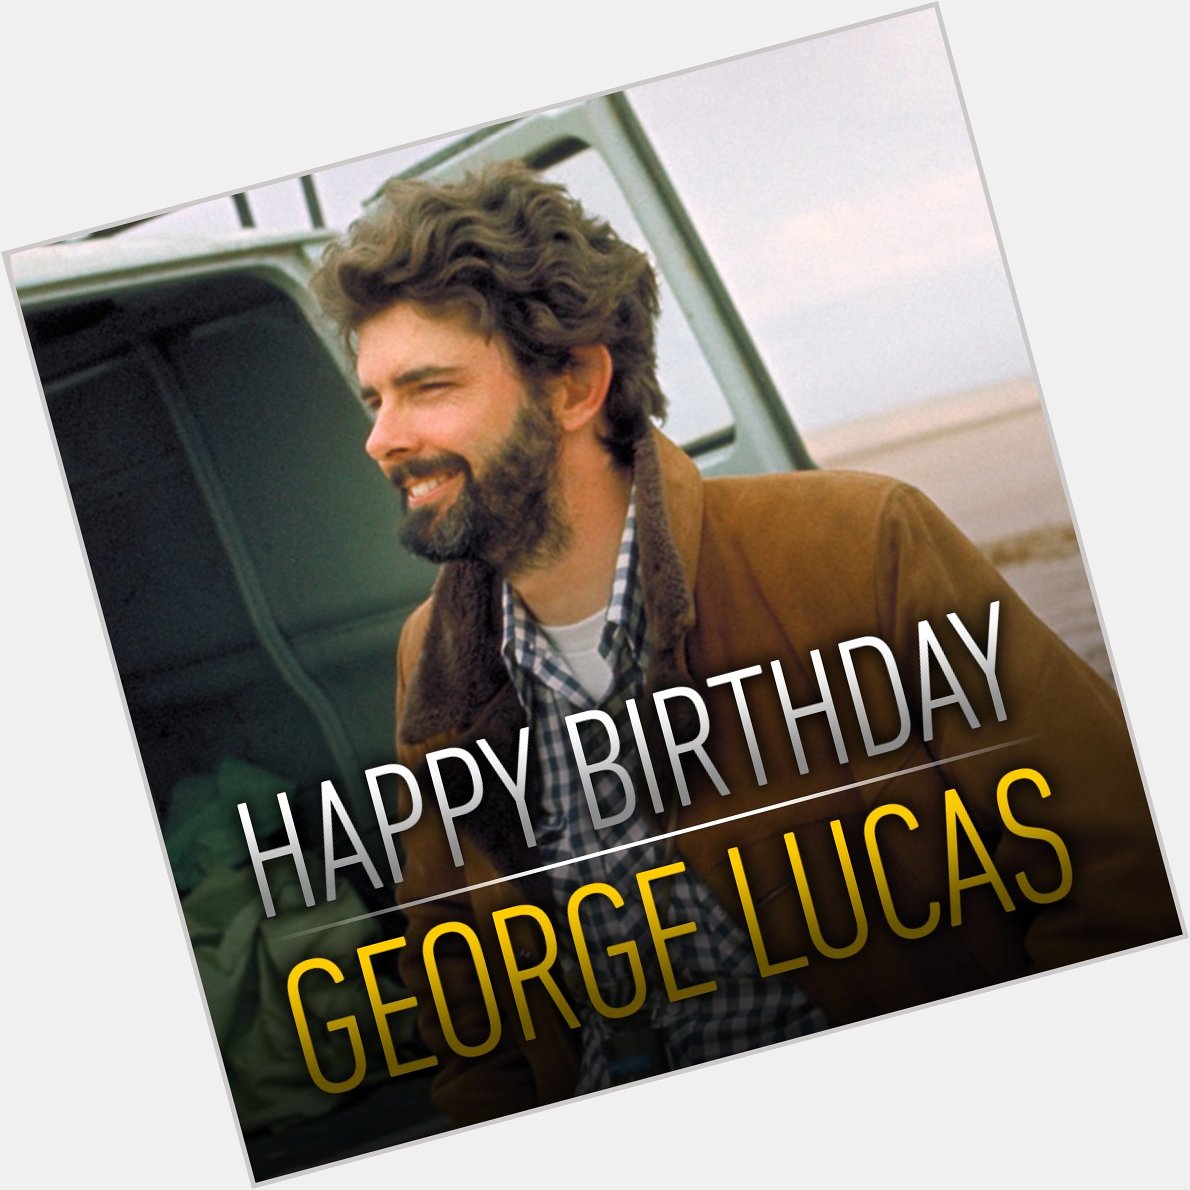 Thank the Maker! A very happy birthday to George Lucas. message us your birthday wishes! 